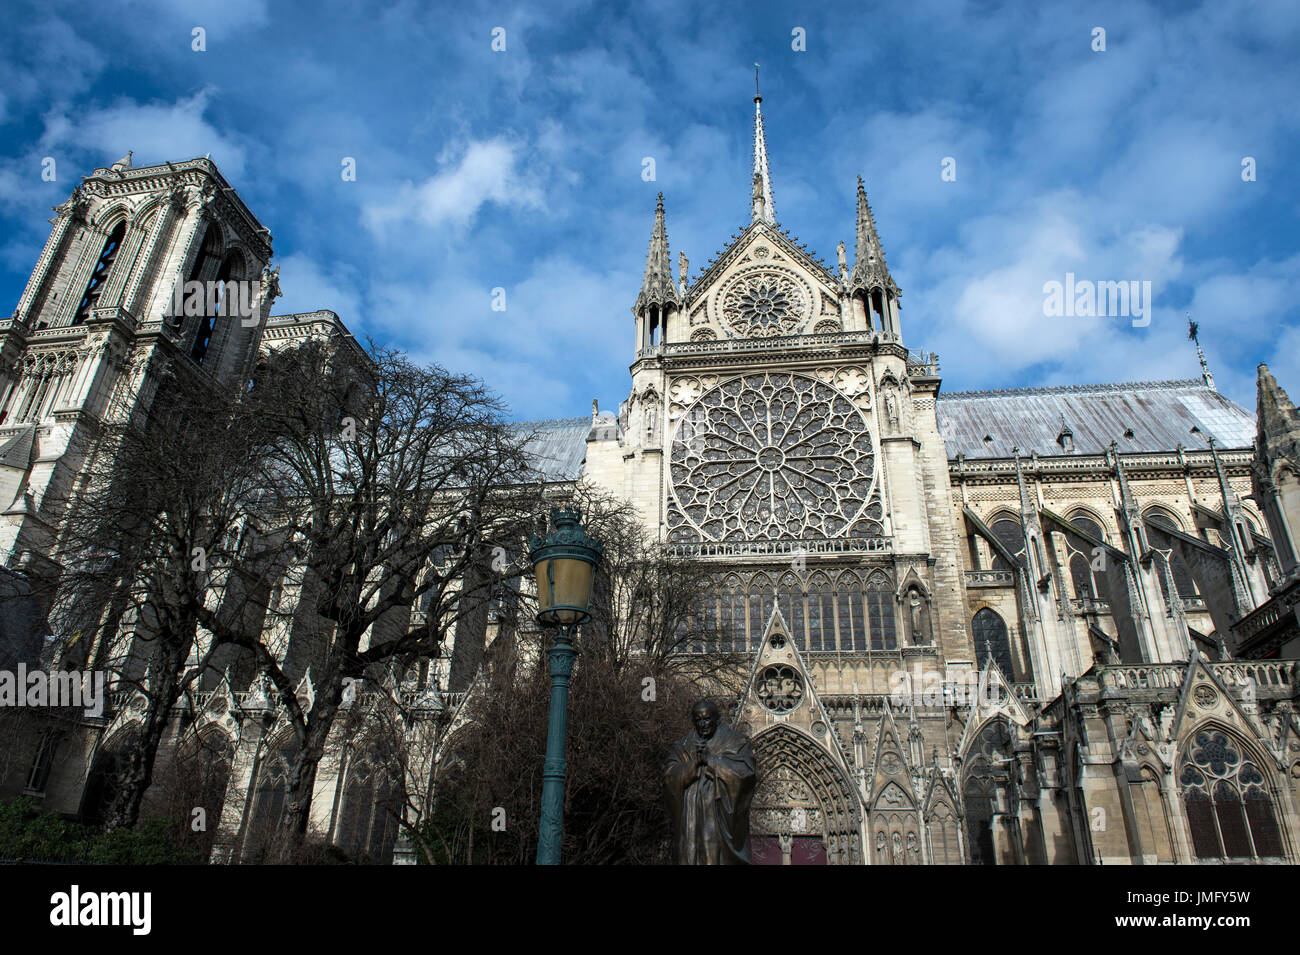 EUROPE, FRANCE, PARIS, NOTRE DAME CATHEDRAL Stock Photo